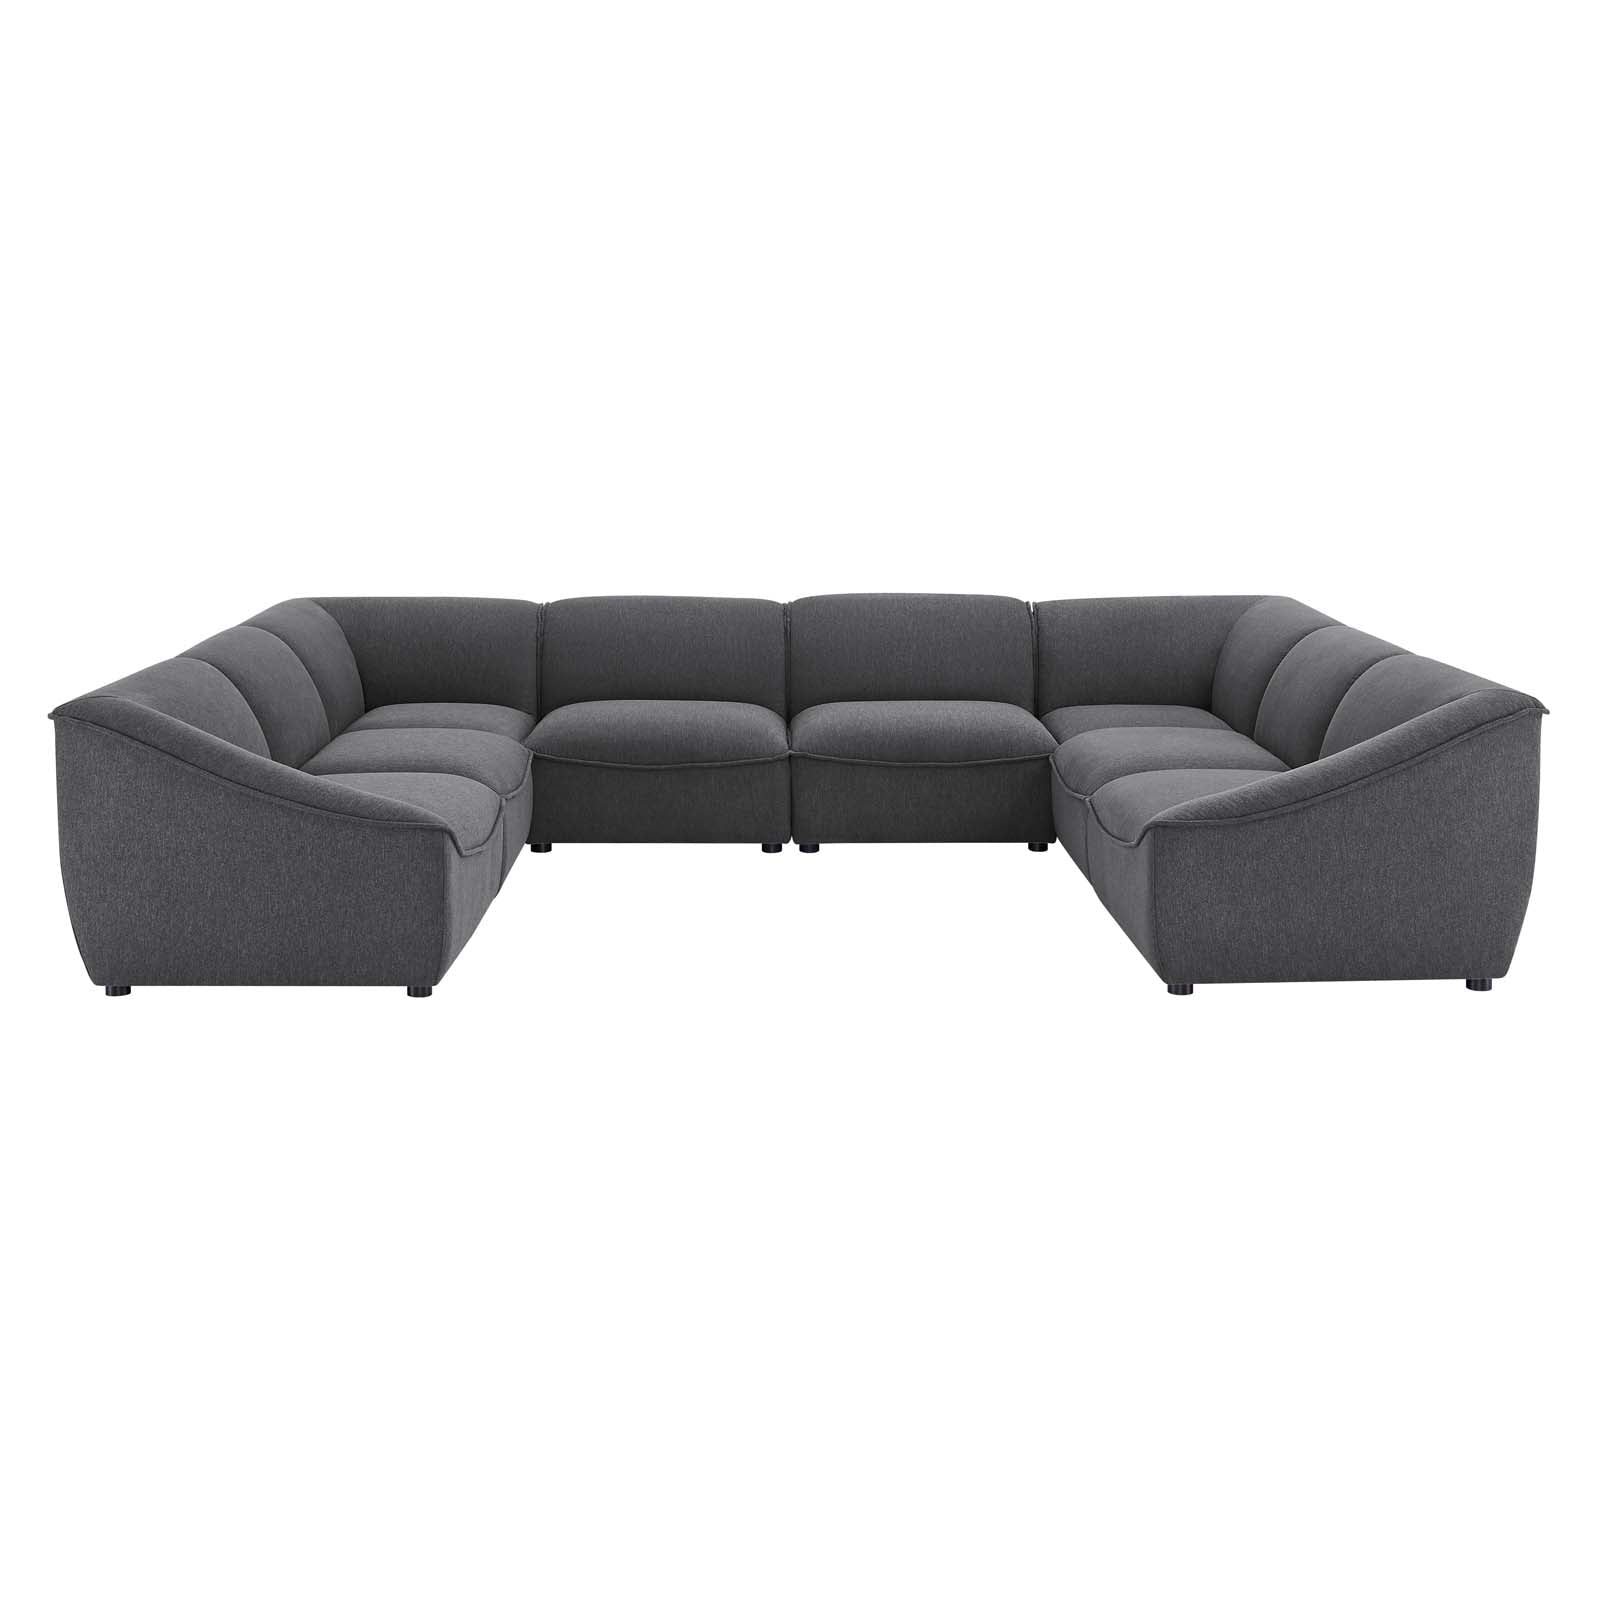 Modway Sectional Sofas - Comprise-8-Piece-Sectional-Sofa-Charcoal